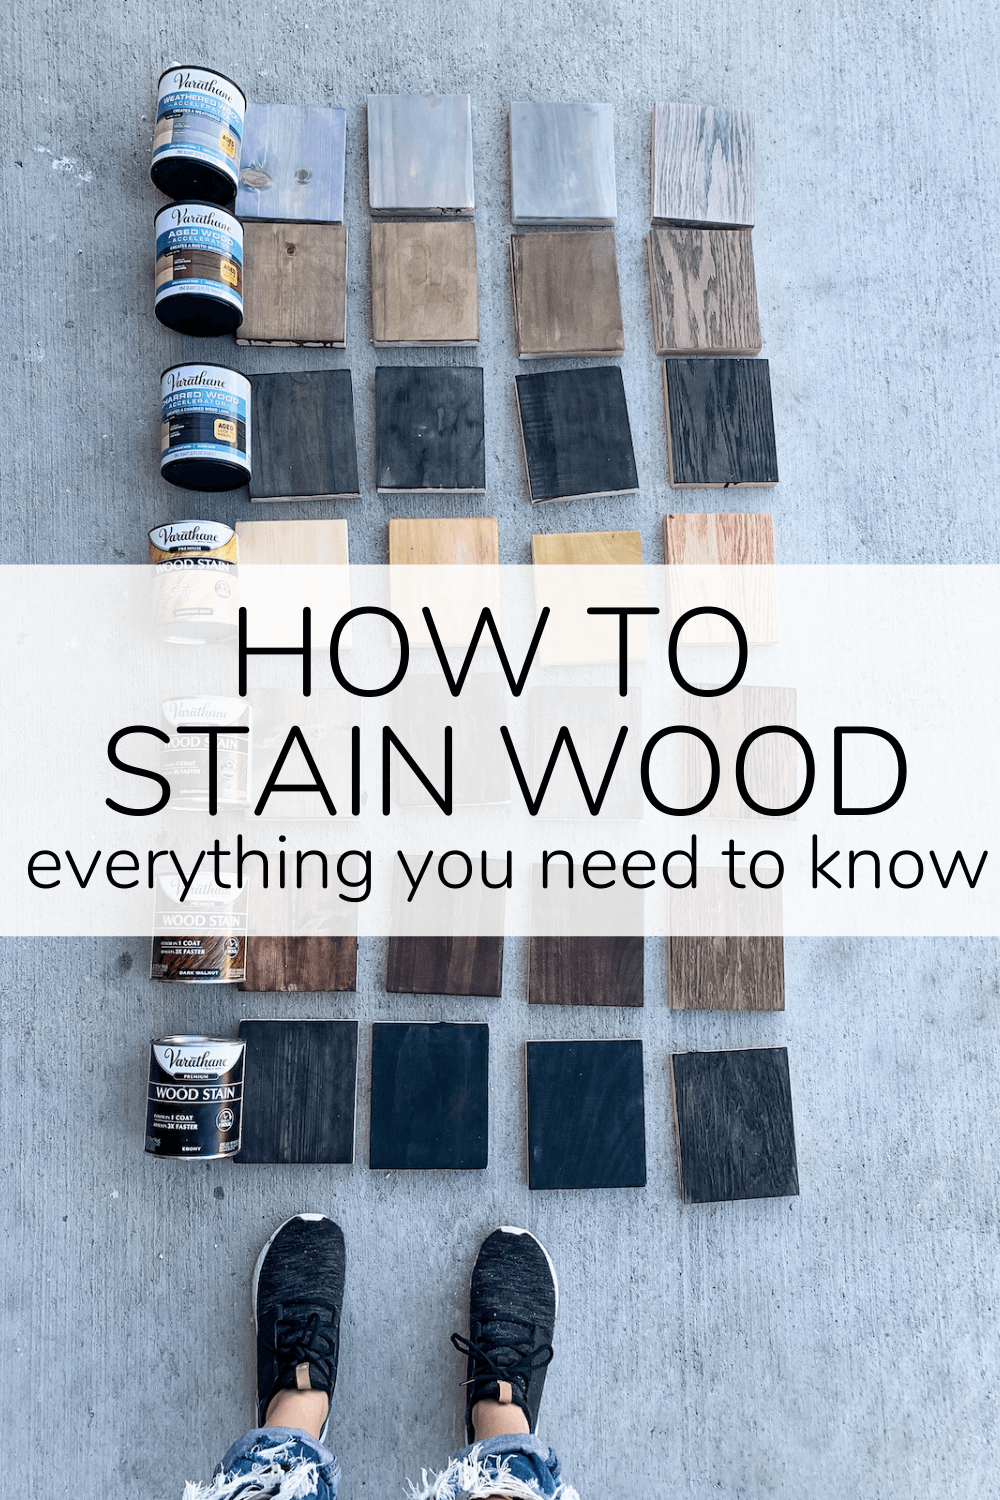 How to Stain Wood The Complete Guide! – Love & Renovations